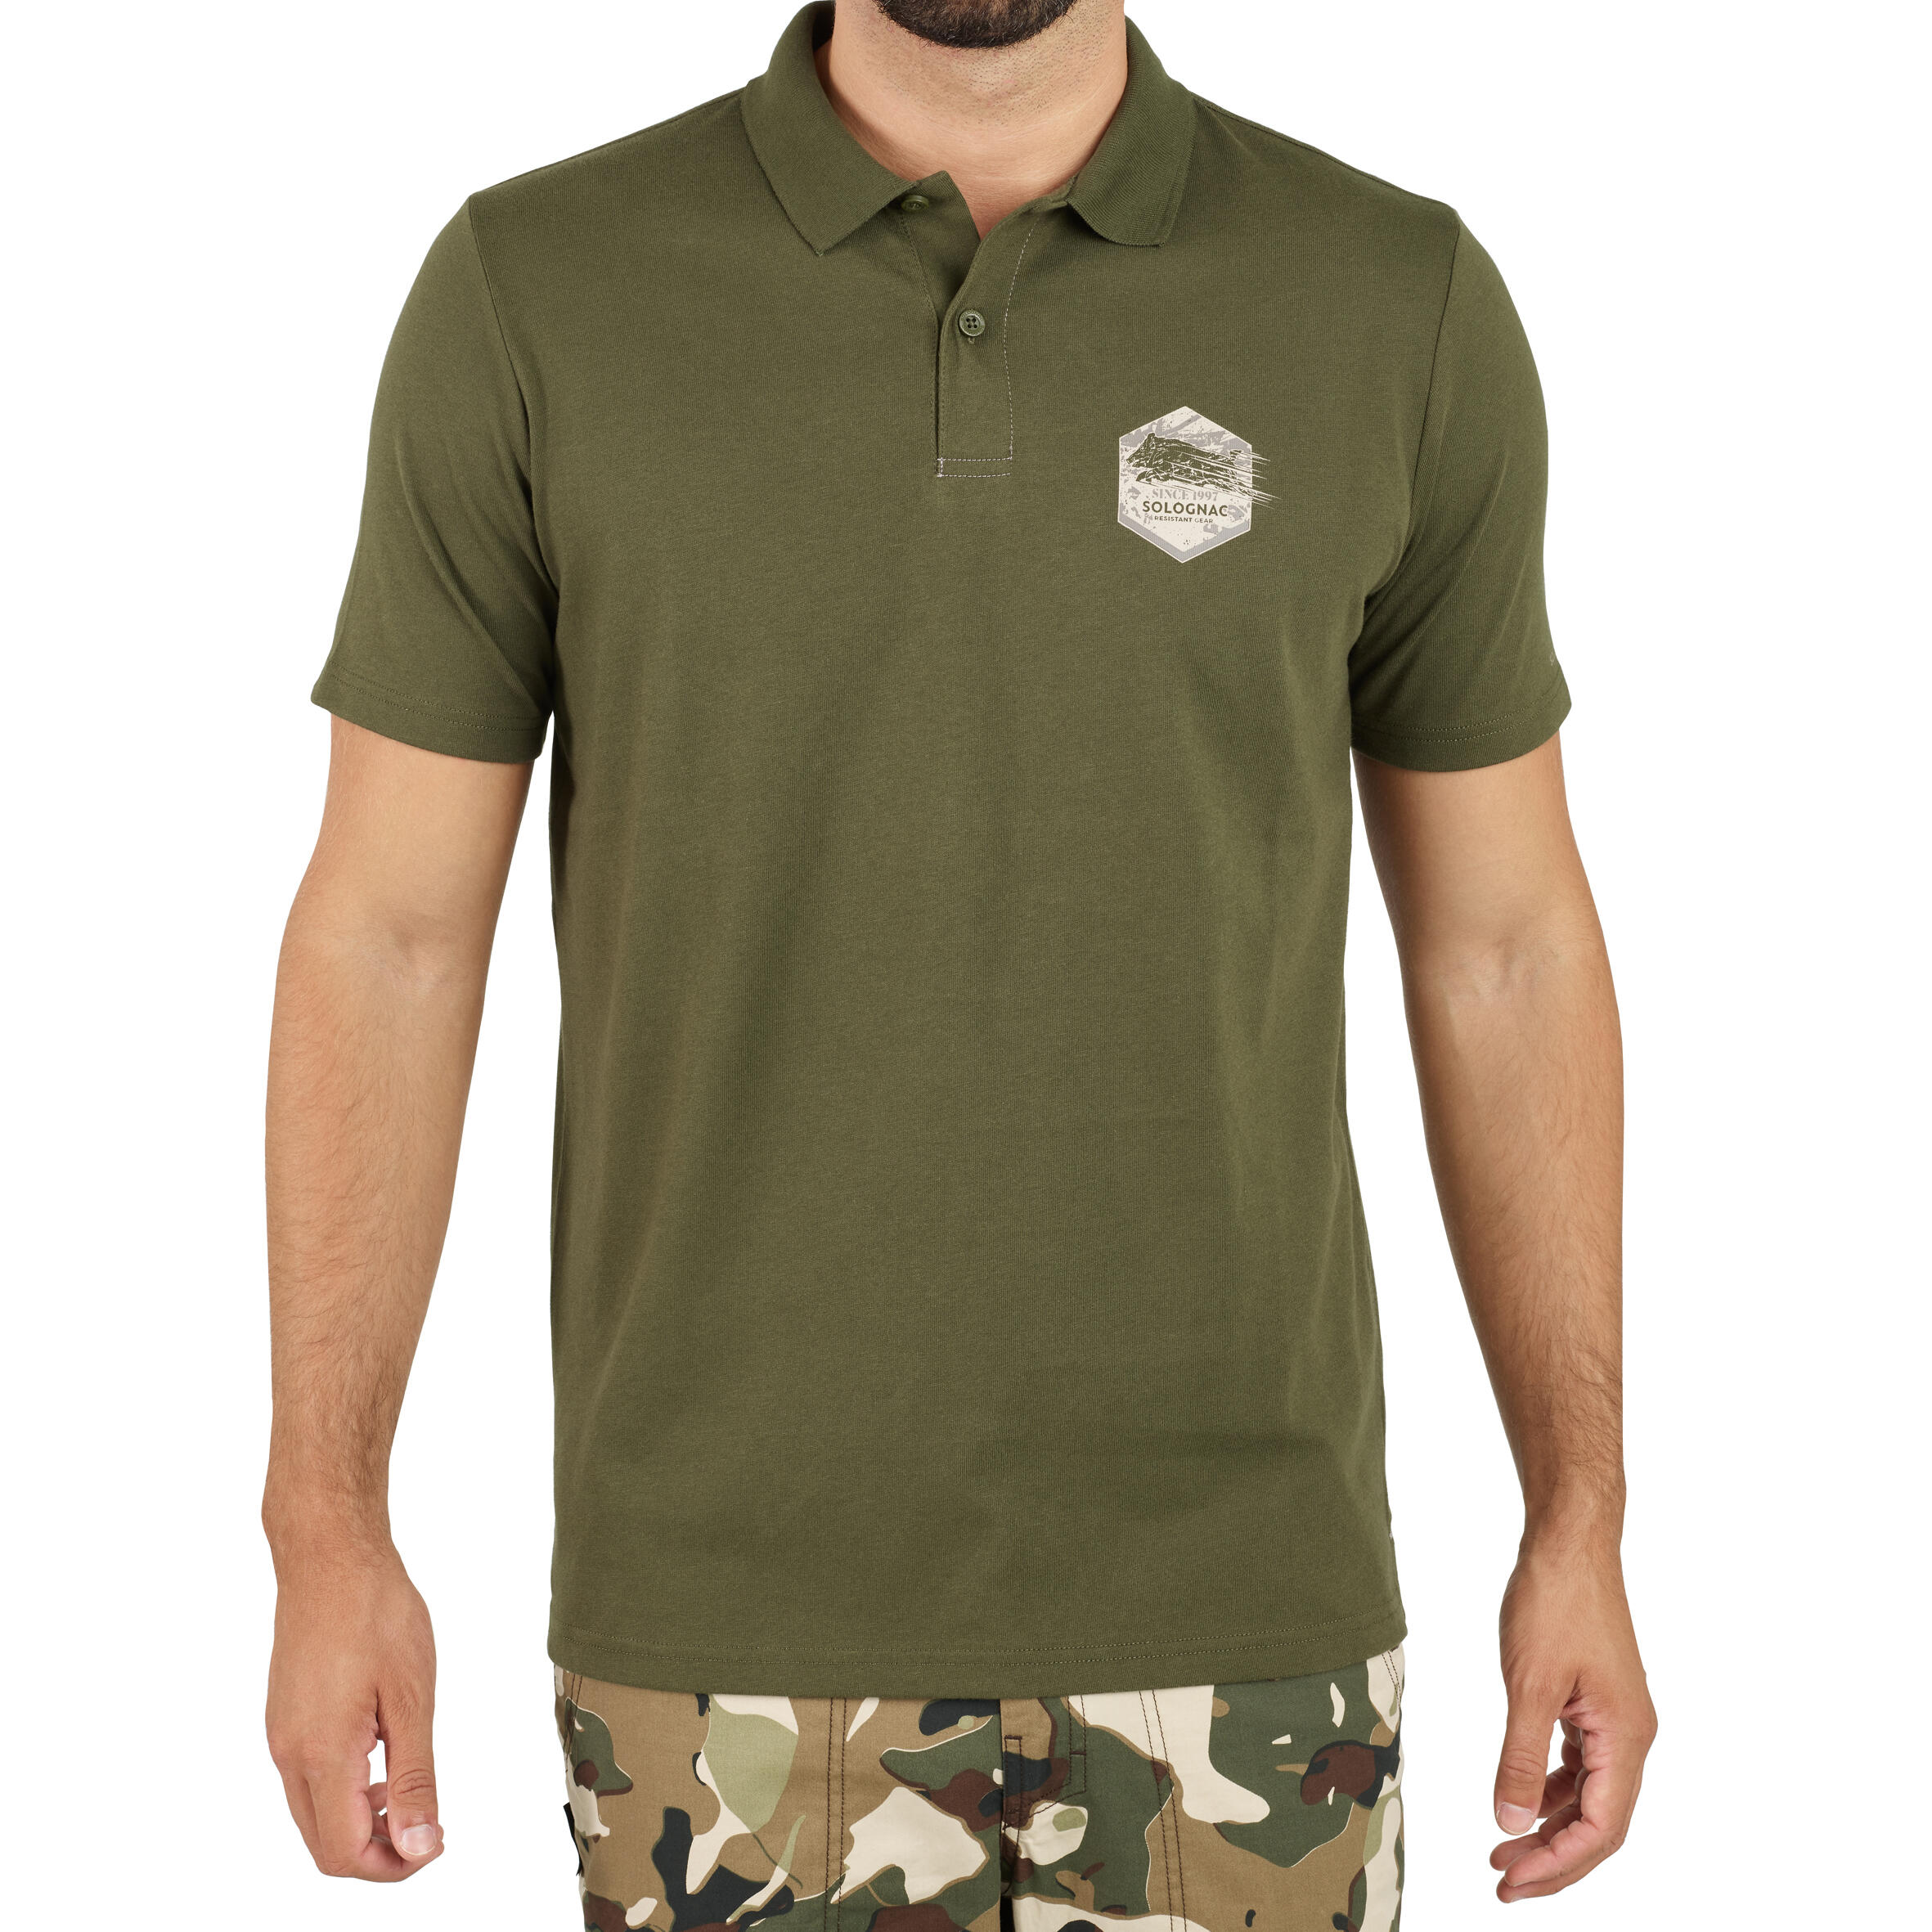 Men's Hunting Short-sleeved Breathable Cotton Polo Shirt - 100 wild boar green 2/8